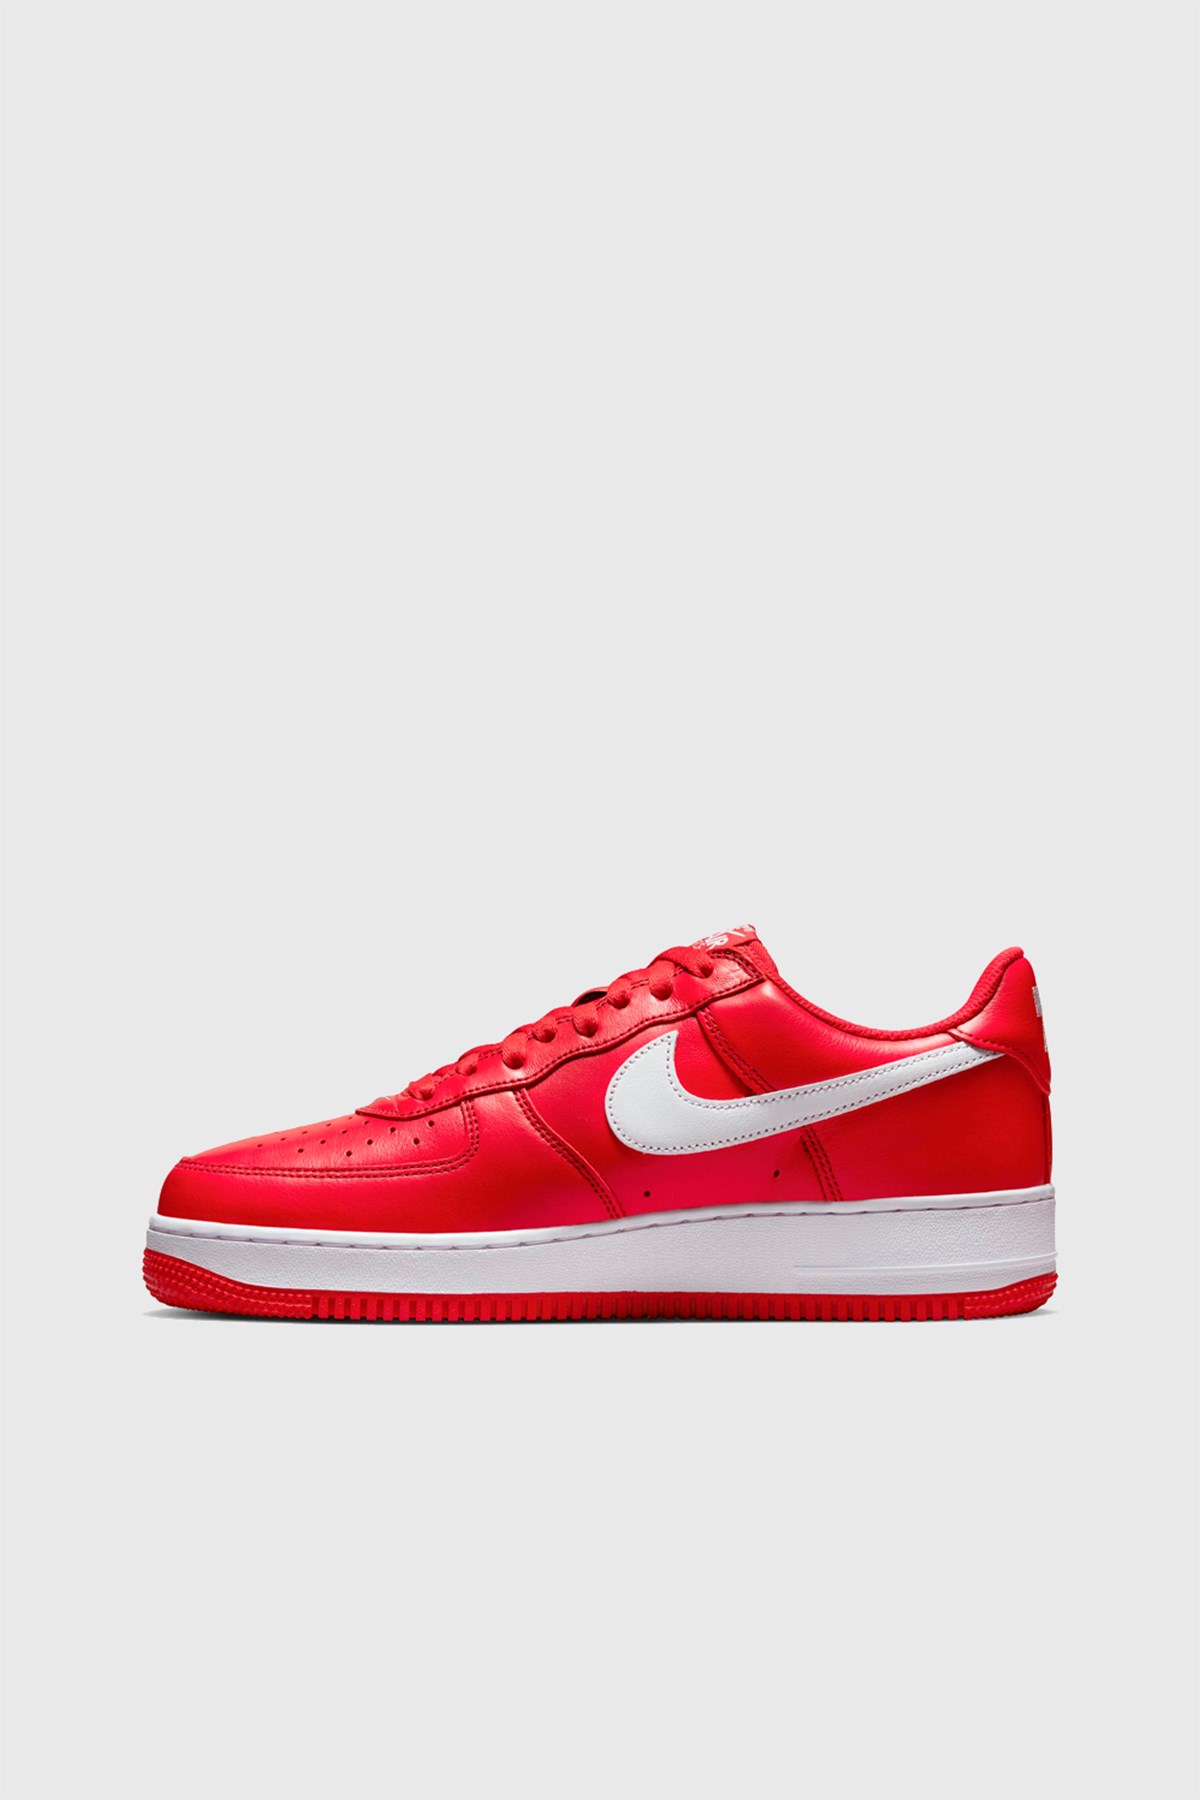 Nike Air Force 1 LOW RETRO (WHITE/UNIVERSITY RED) – The Shop 147